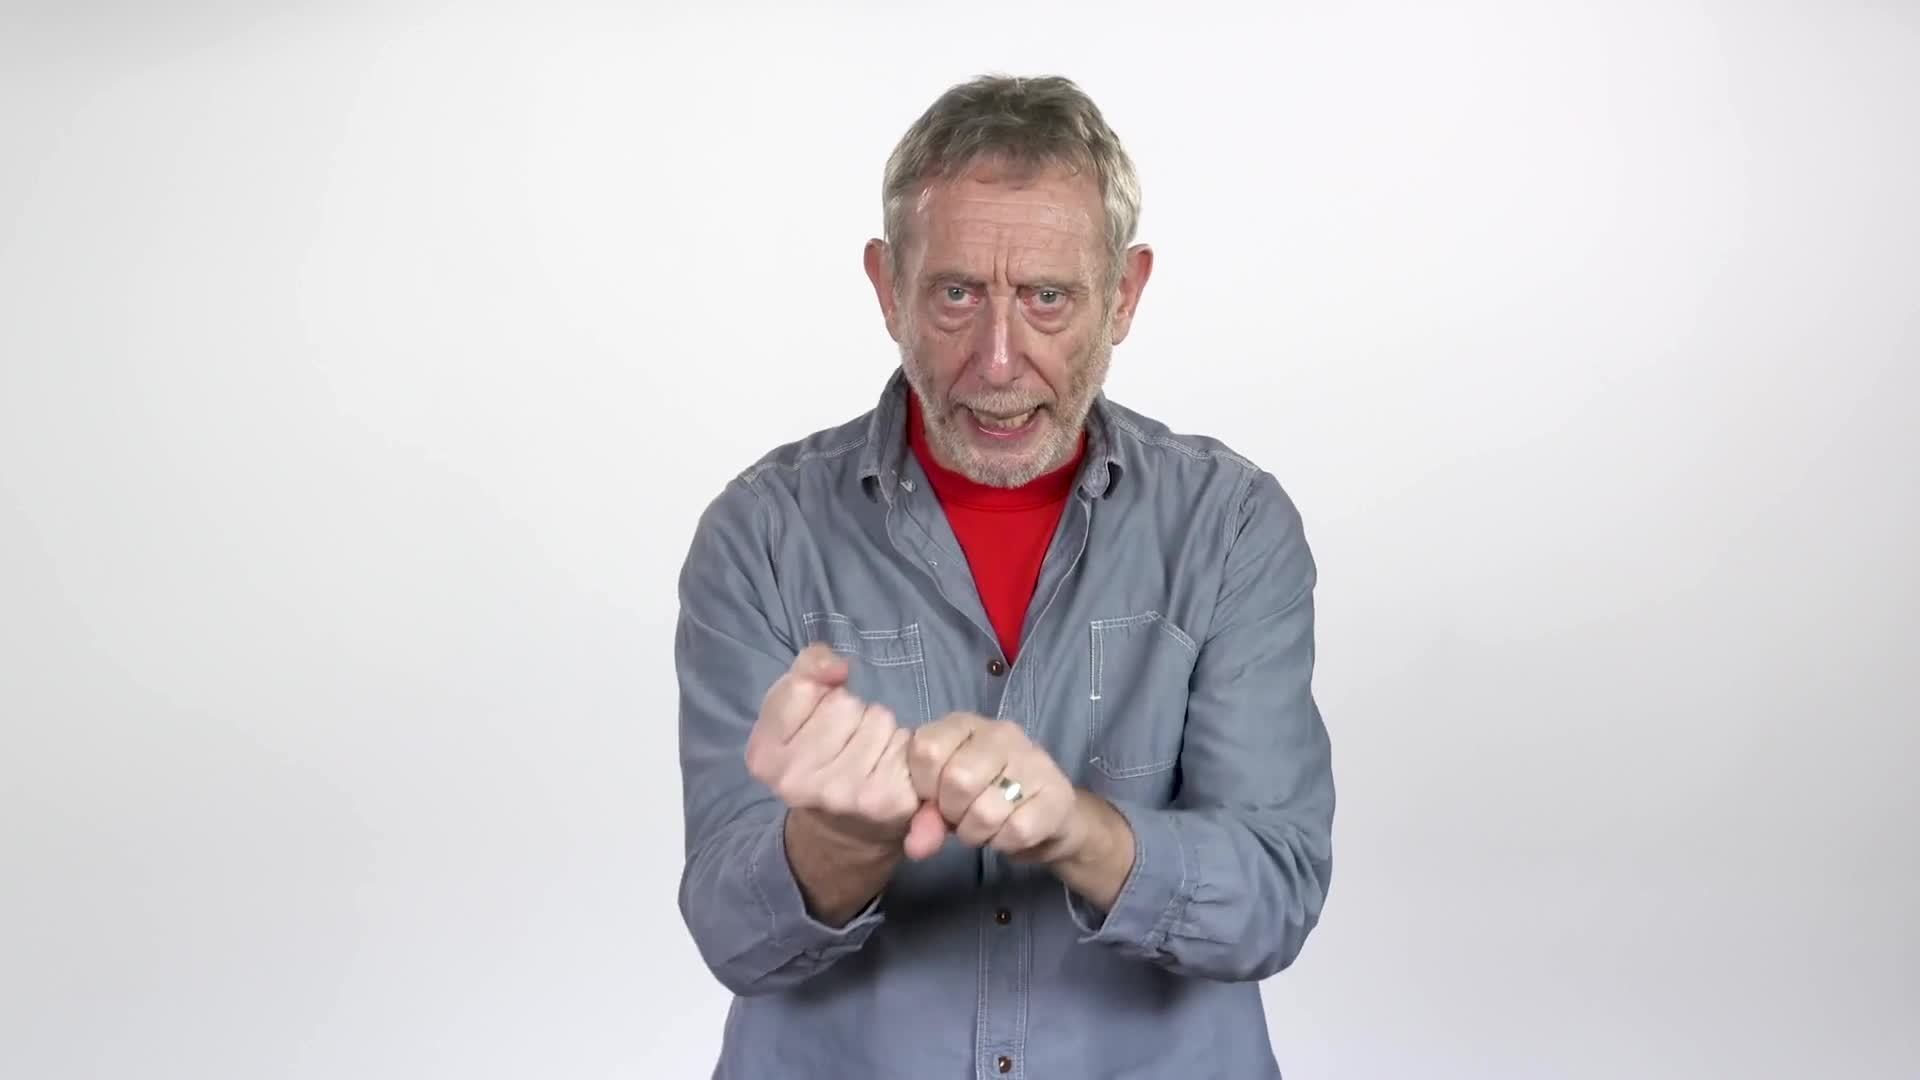 Jabberwocky | CLASSIC | Lewis Caroll - Kids' Poems and Stories With Michael Rosen